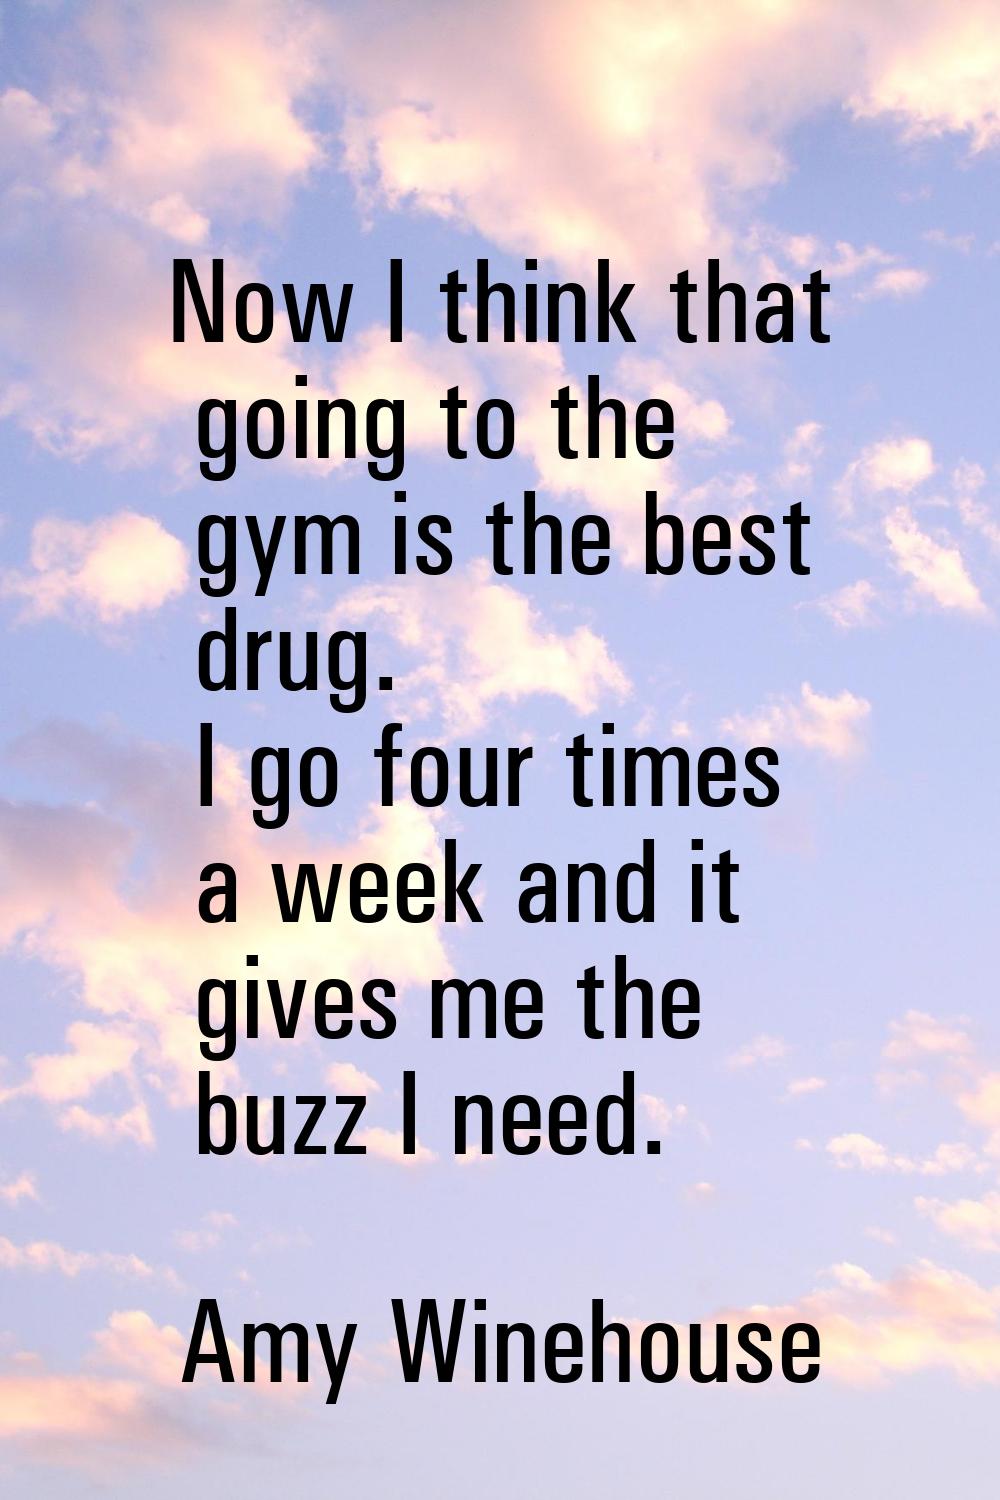 Now I think that going to the gym is the best drug. I go four times a week and it gives me the buzz